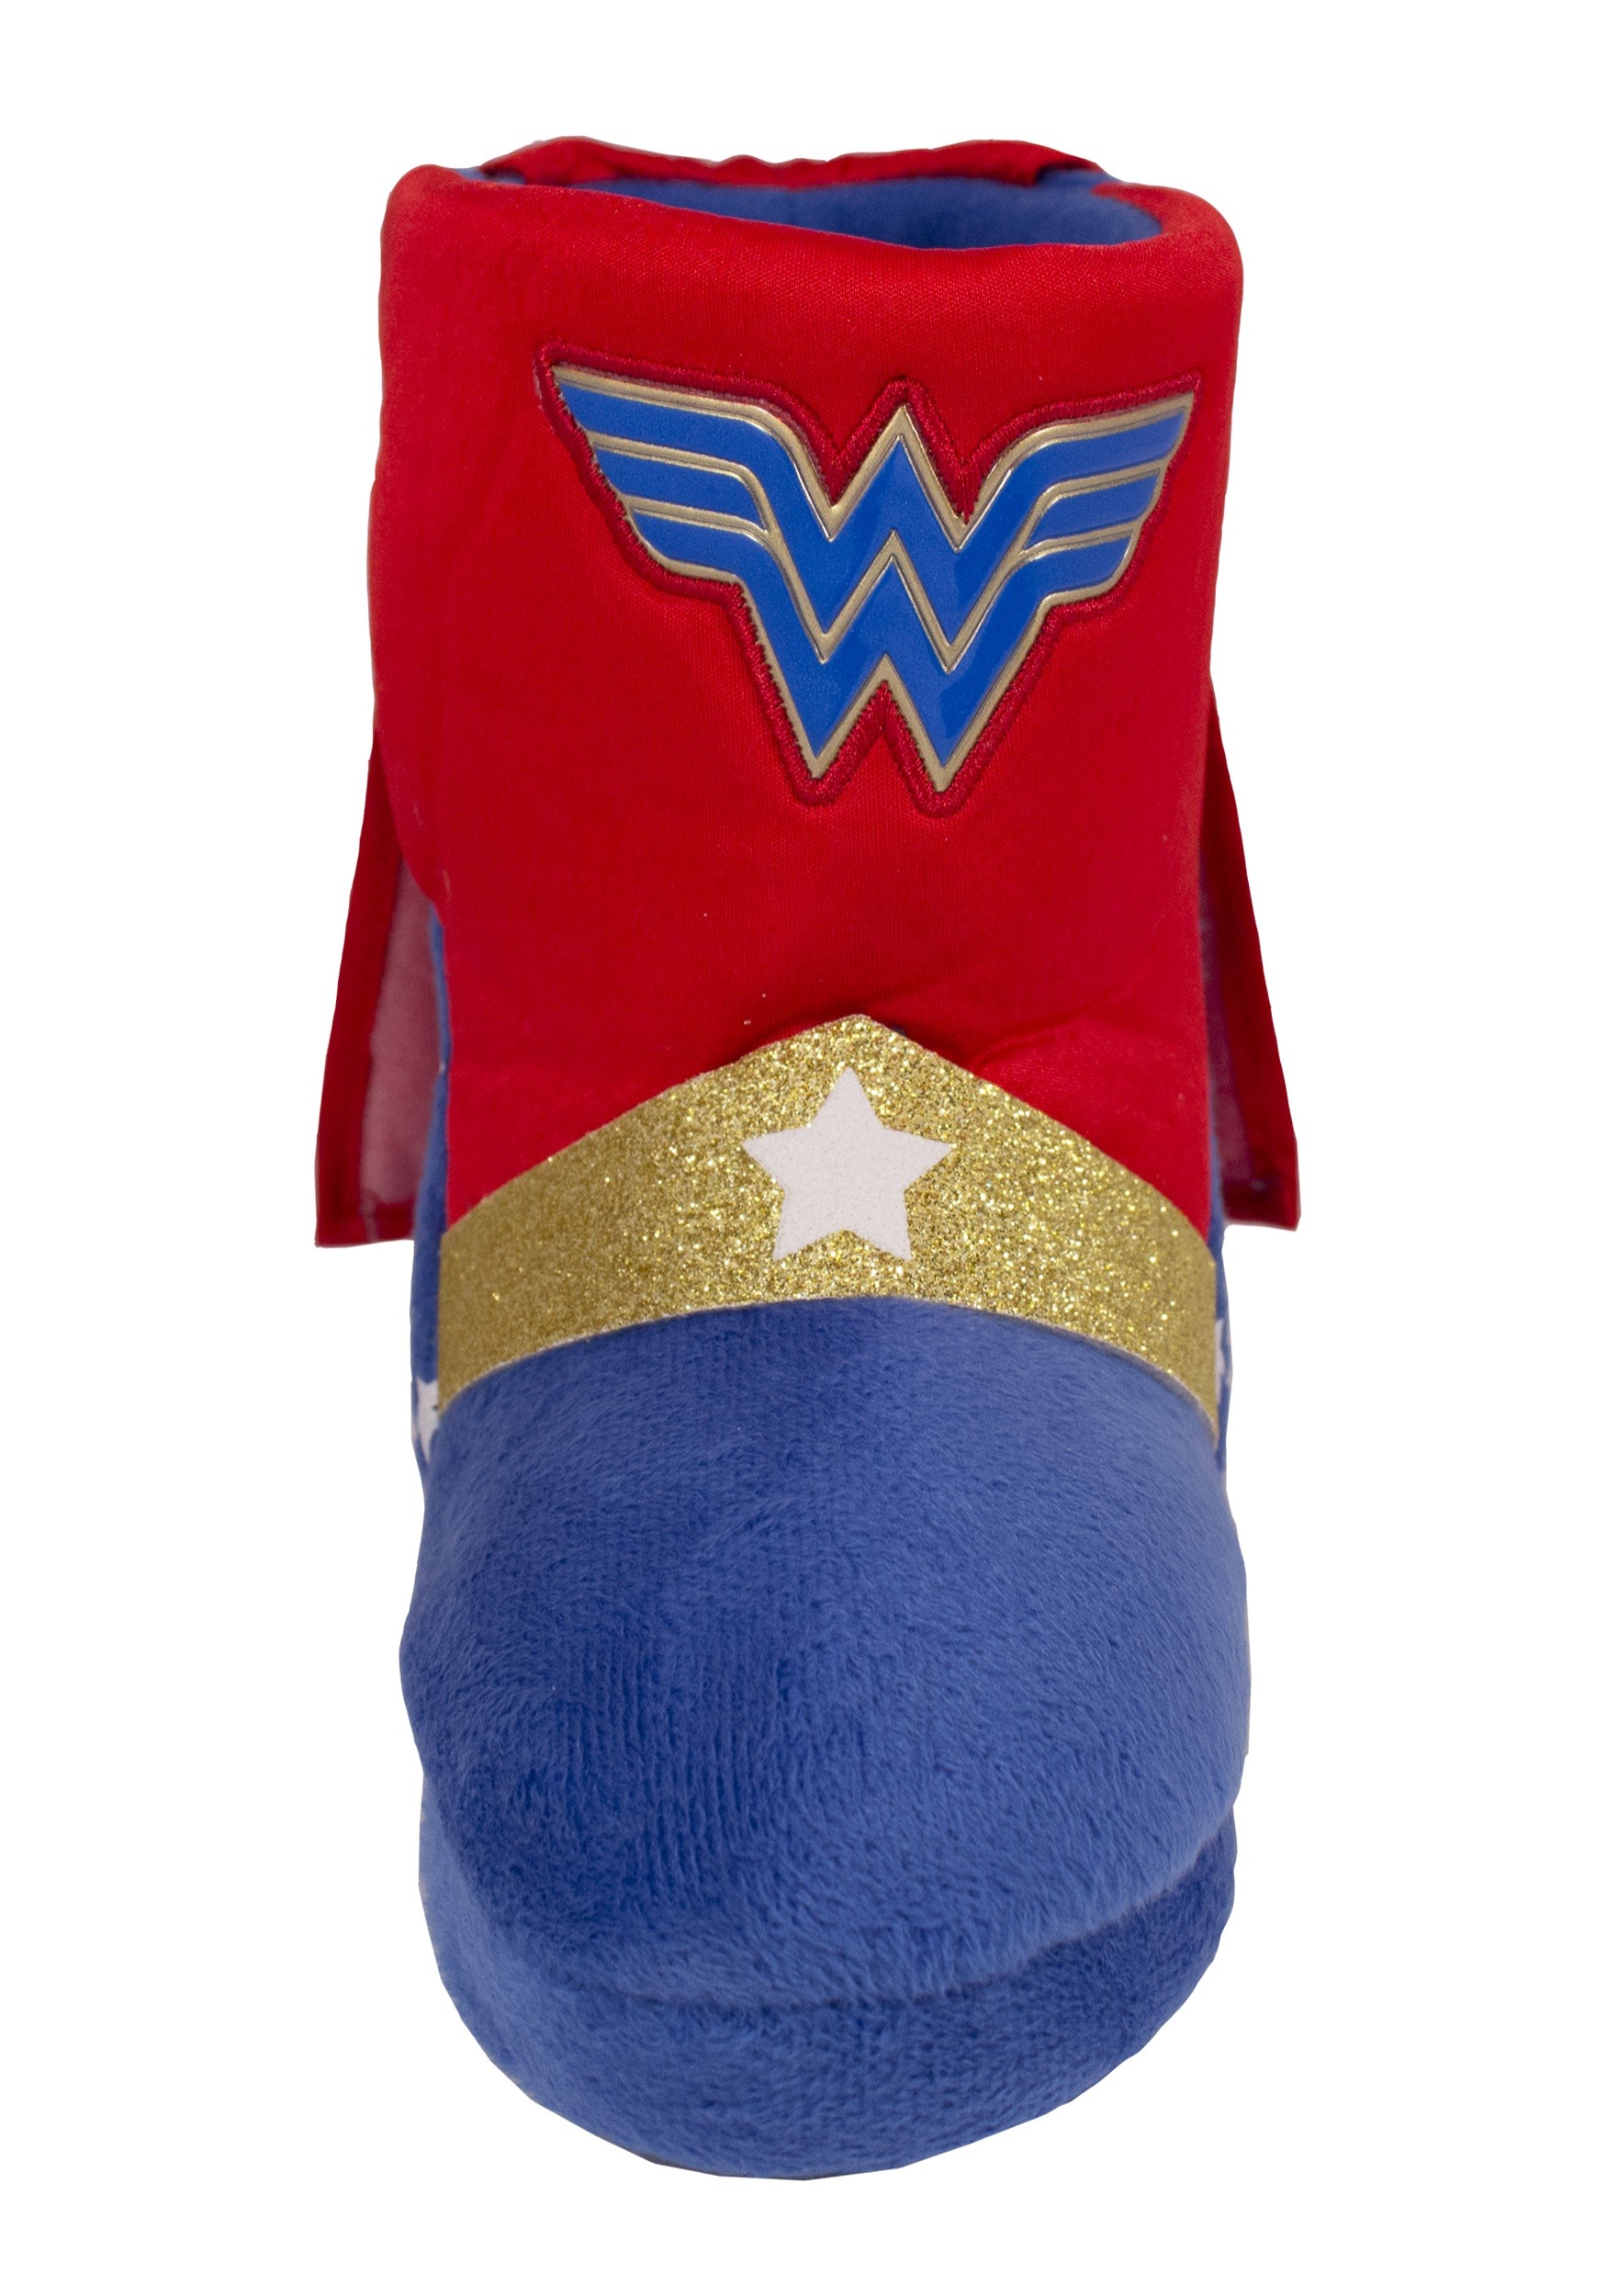 DC Wonder Woman Caped Boot Kids Slippers